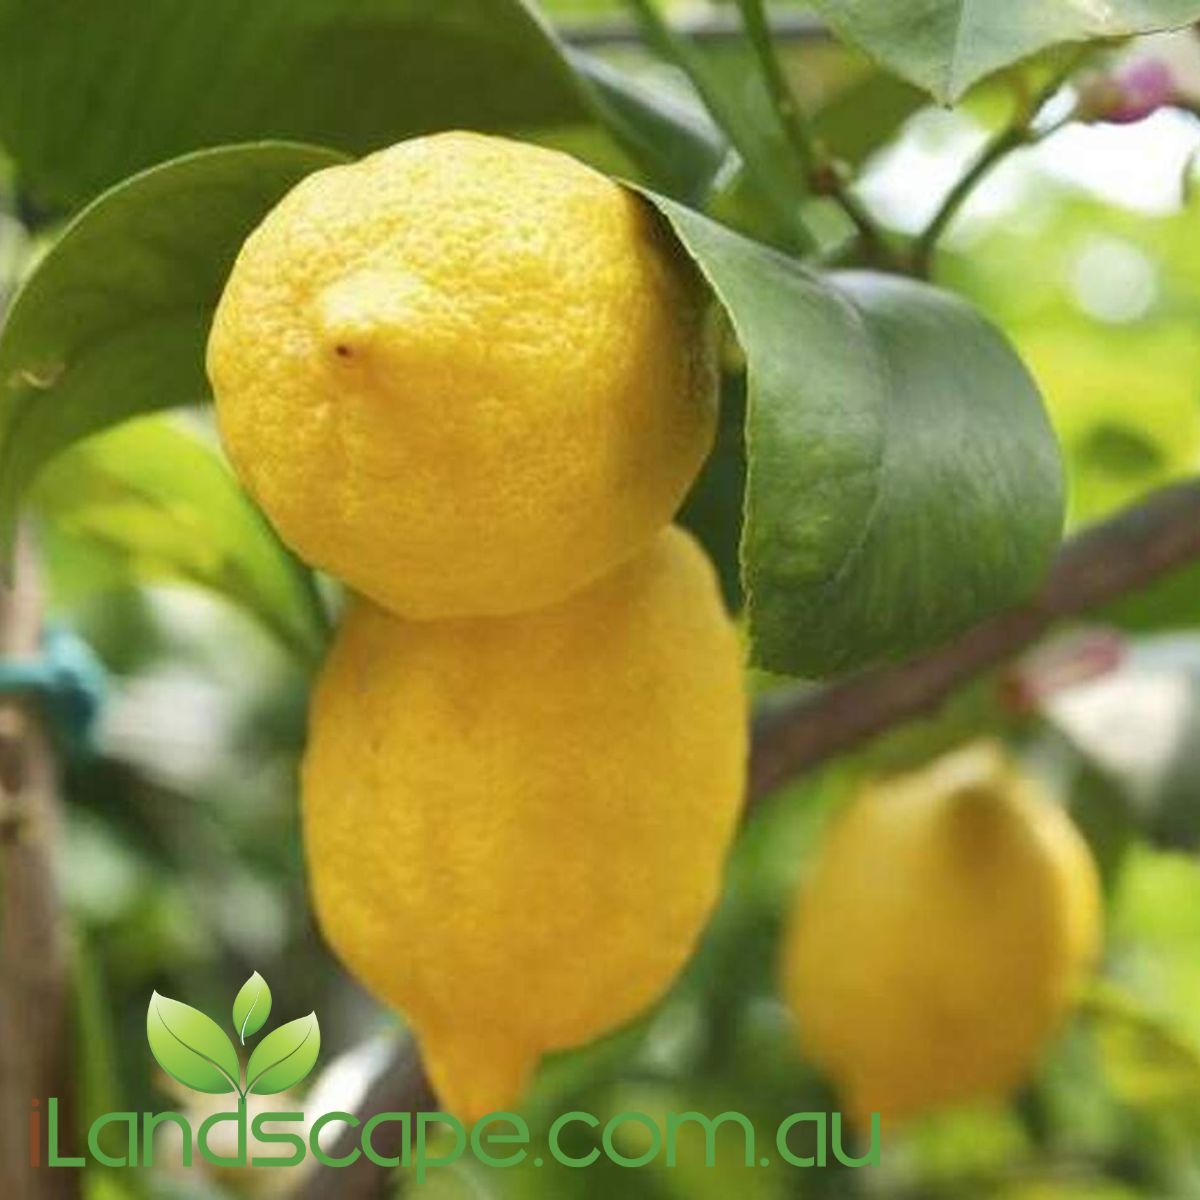 Lemon Dwarf 'Eureka SL' - It produces a mass of fragrant flowers and vigorous almost thornless, evergreen foliage. Dwarf Eureka is an ideal lemon for the home garden, bearing fruit all year round and peaking in summer. 